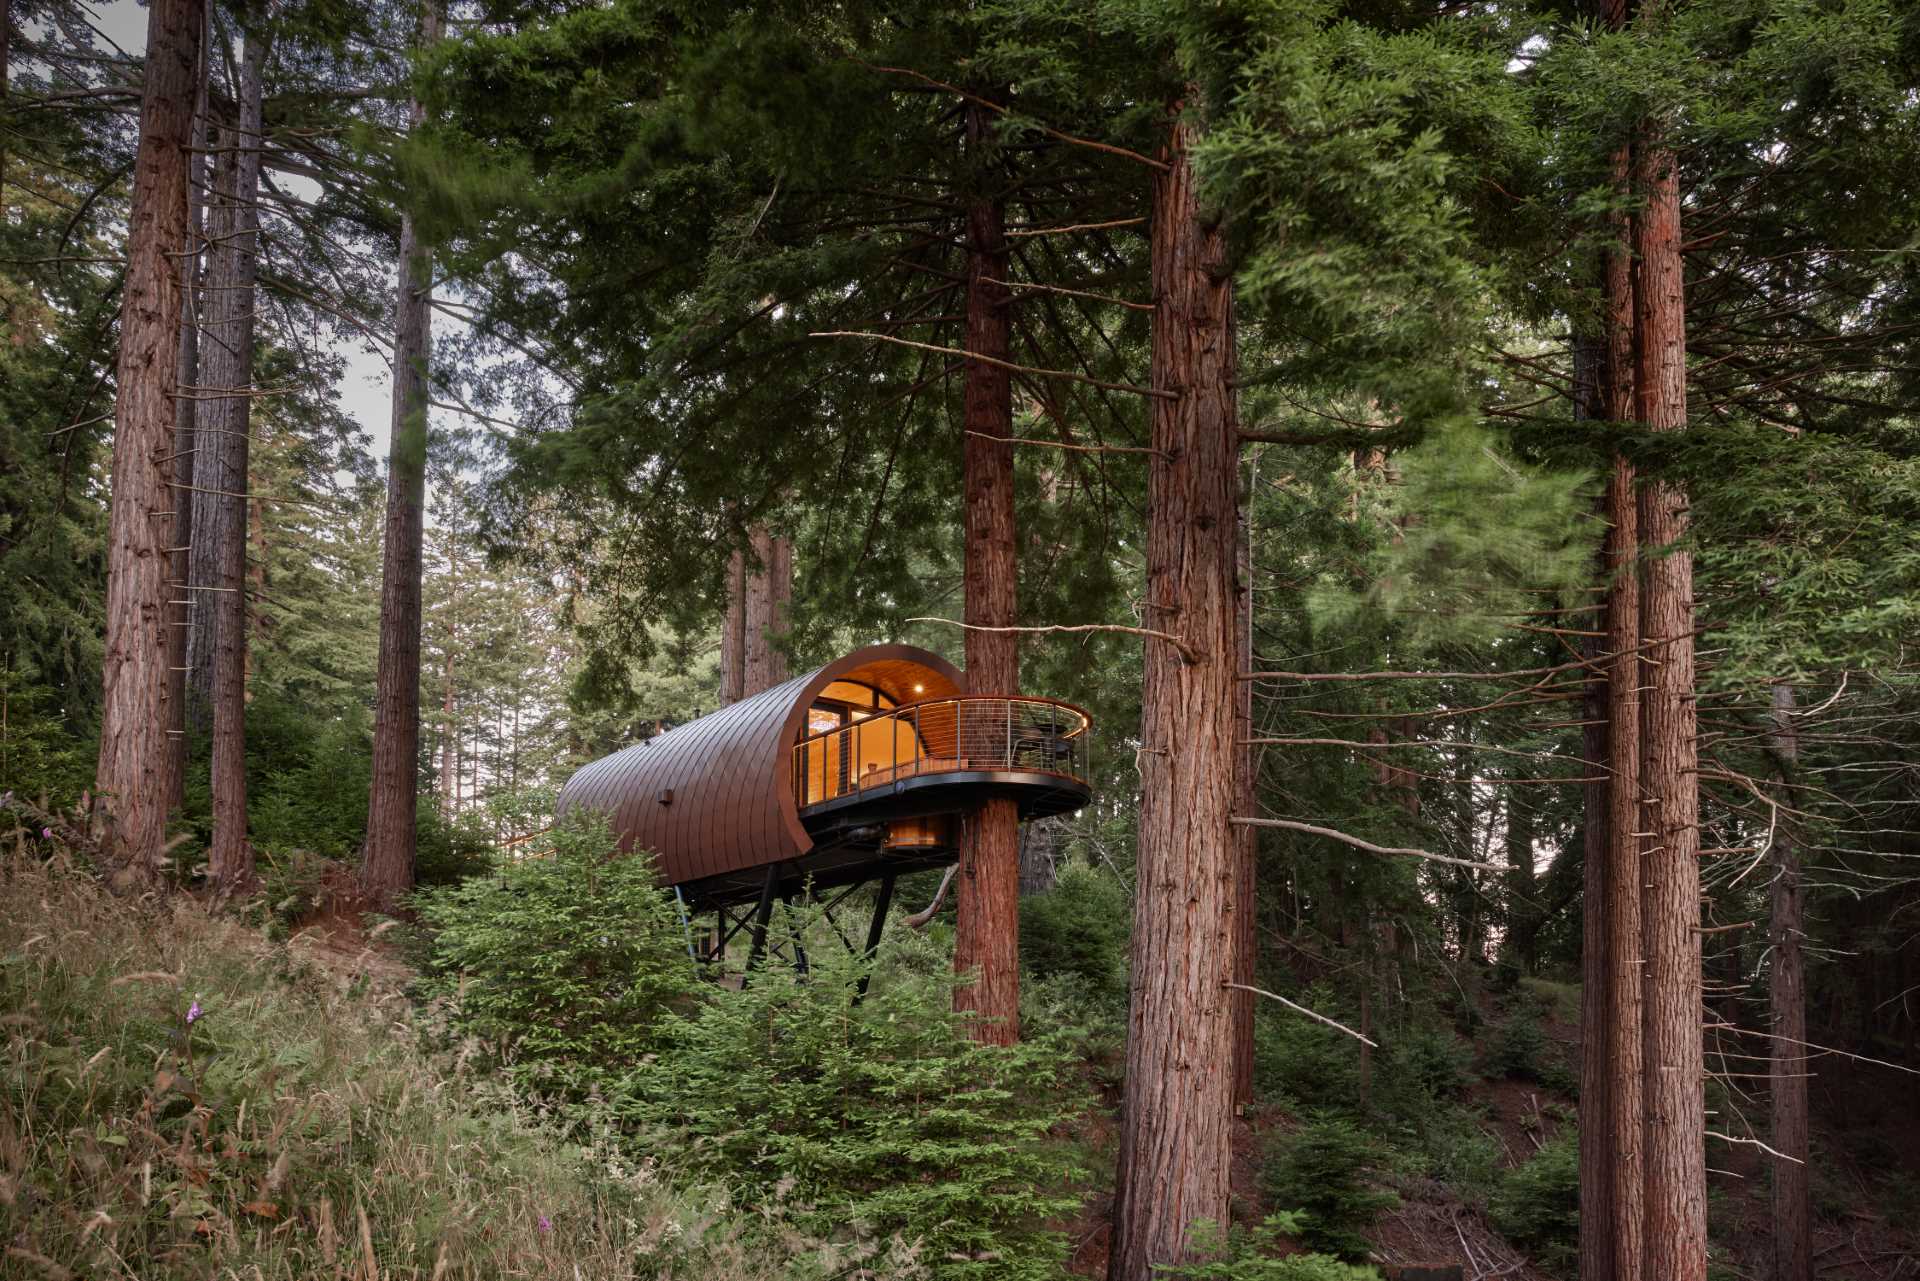 A modern treehouse that has an tubular design and is wrapped in diamond-shaped metal tiles.